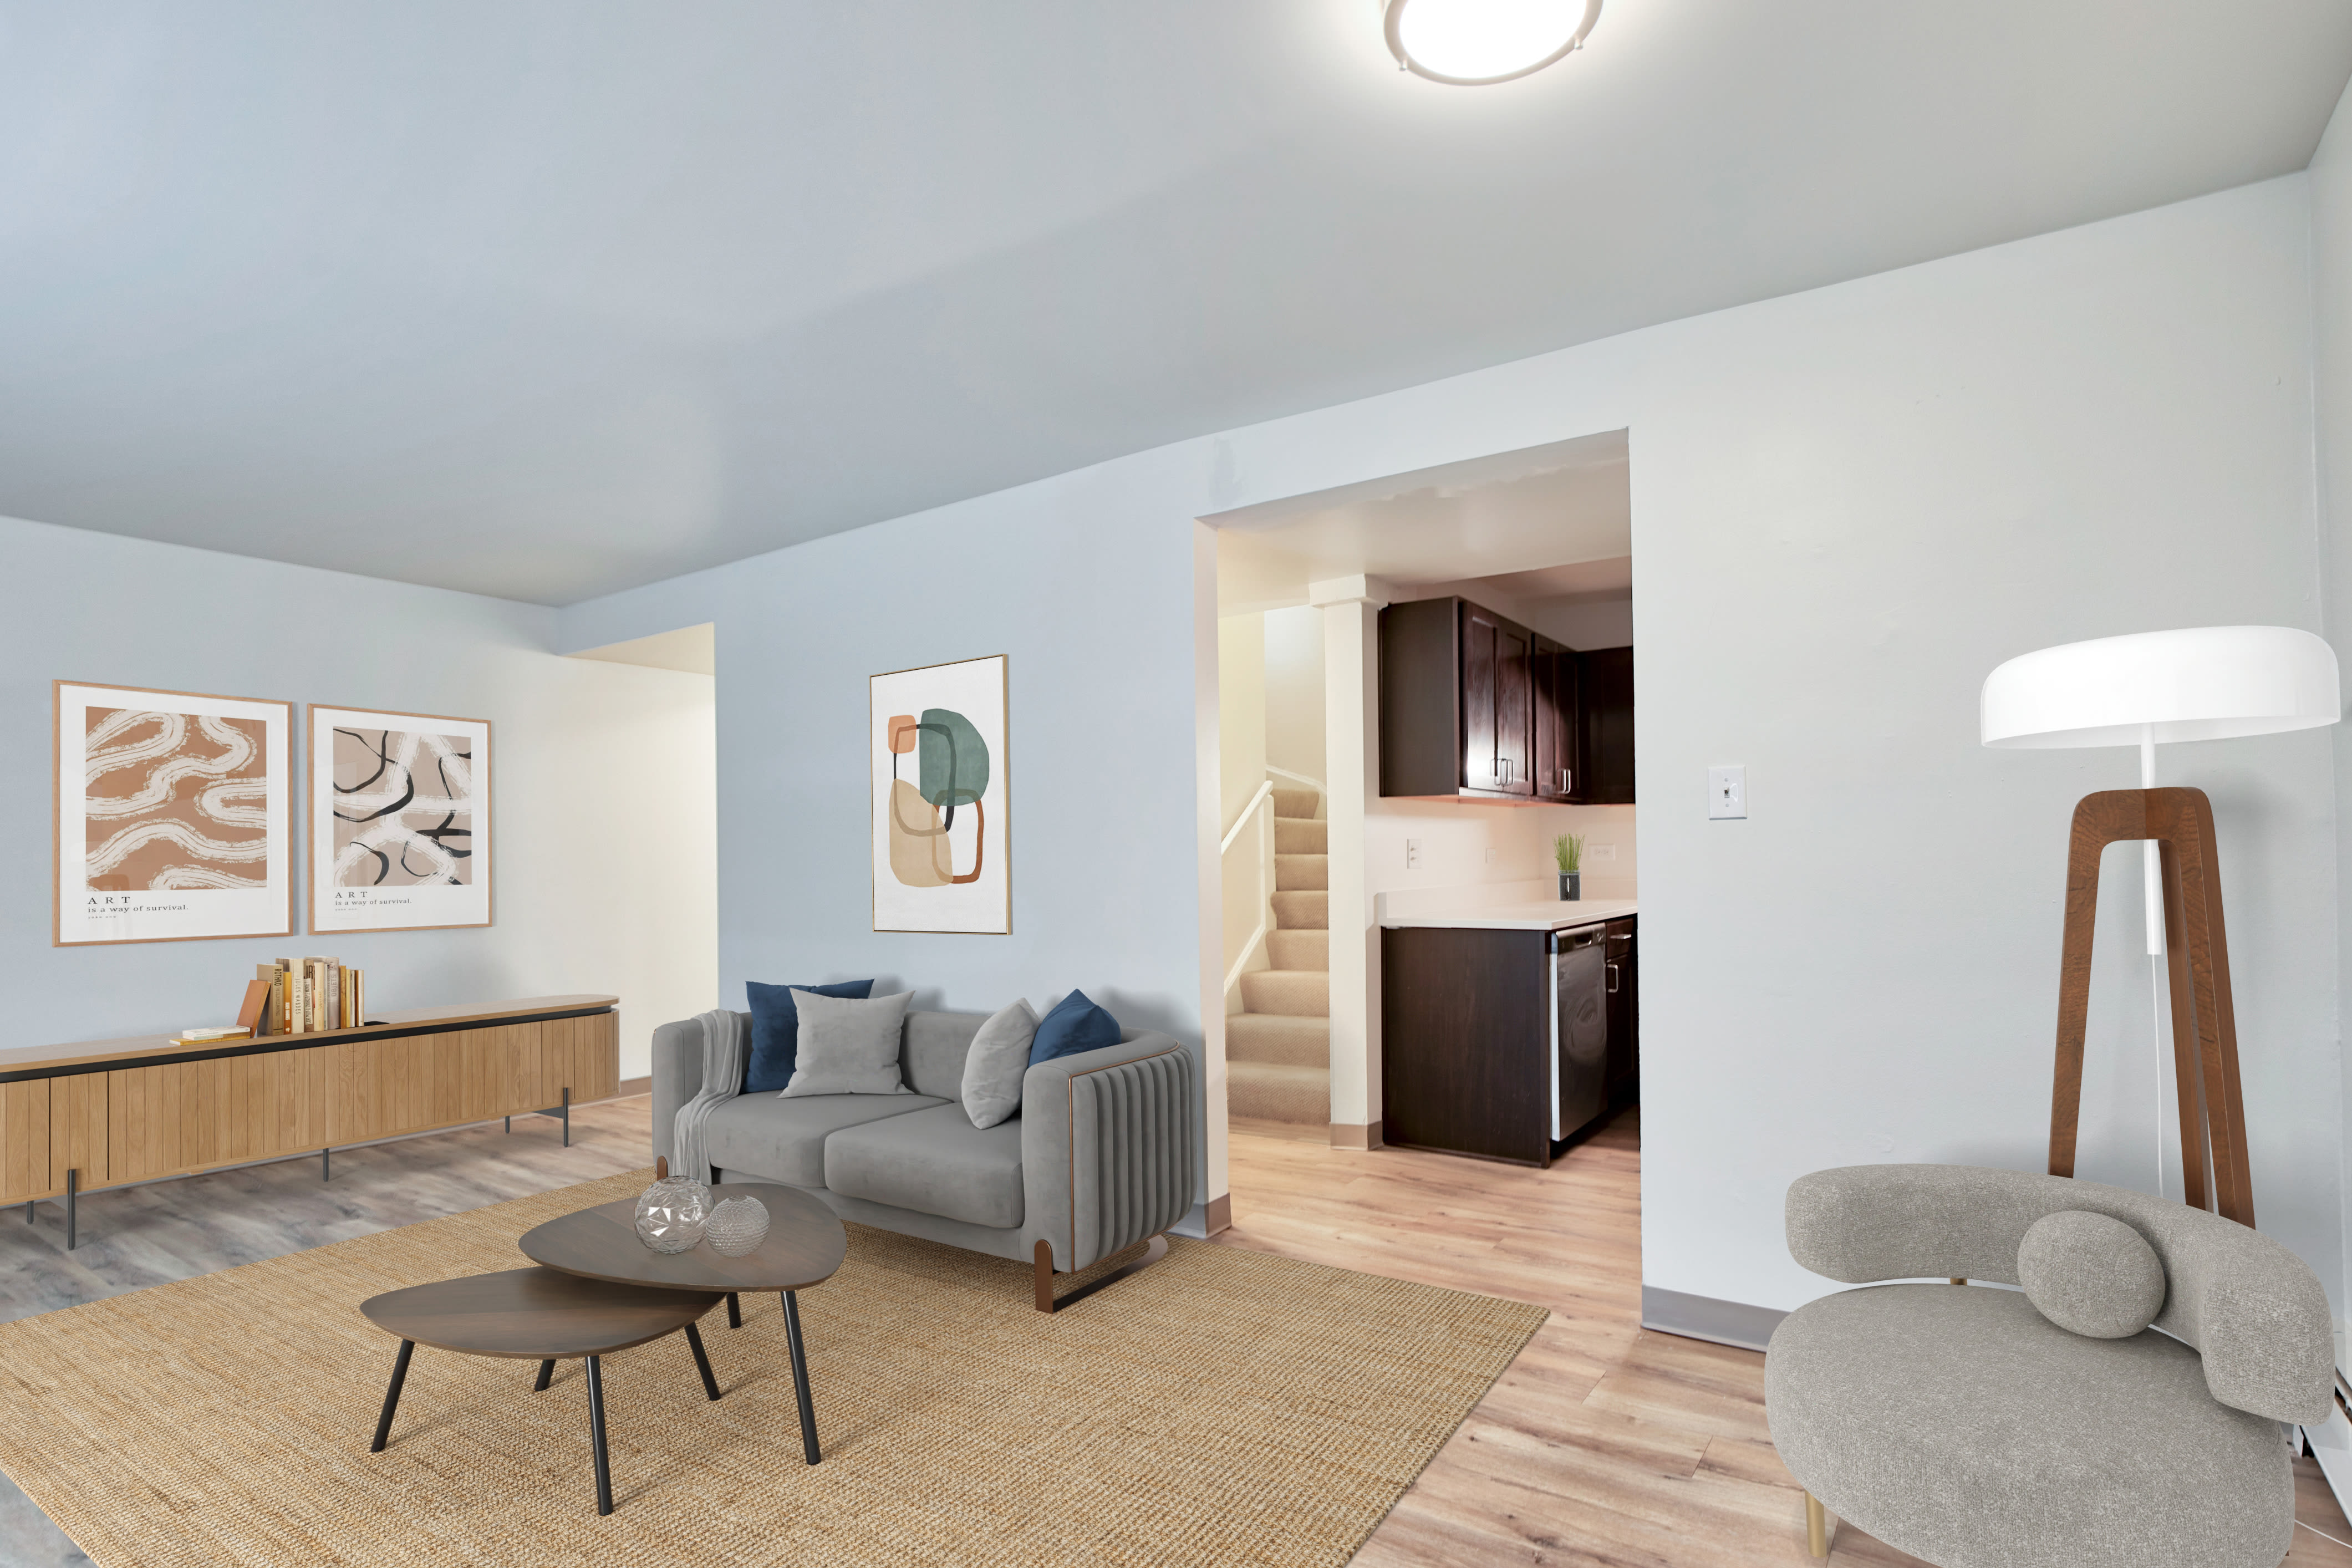 Living space at BJ Wright Court Apartments in Chicago, Illinois